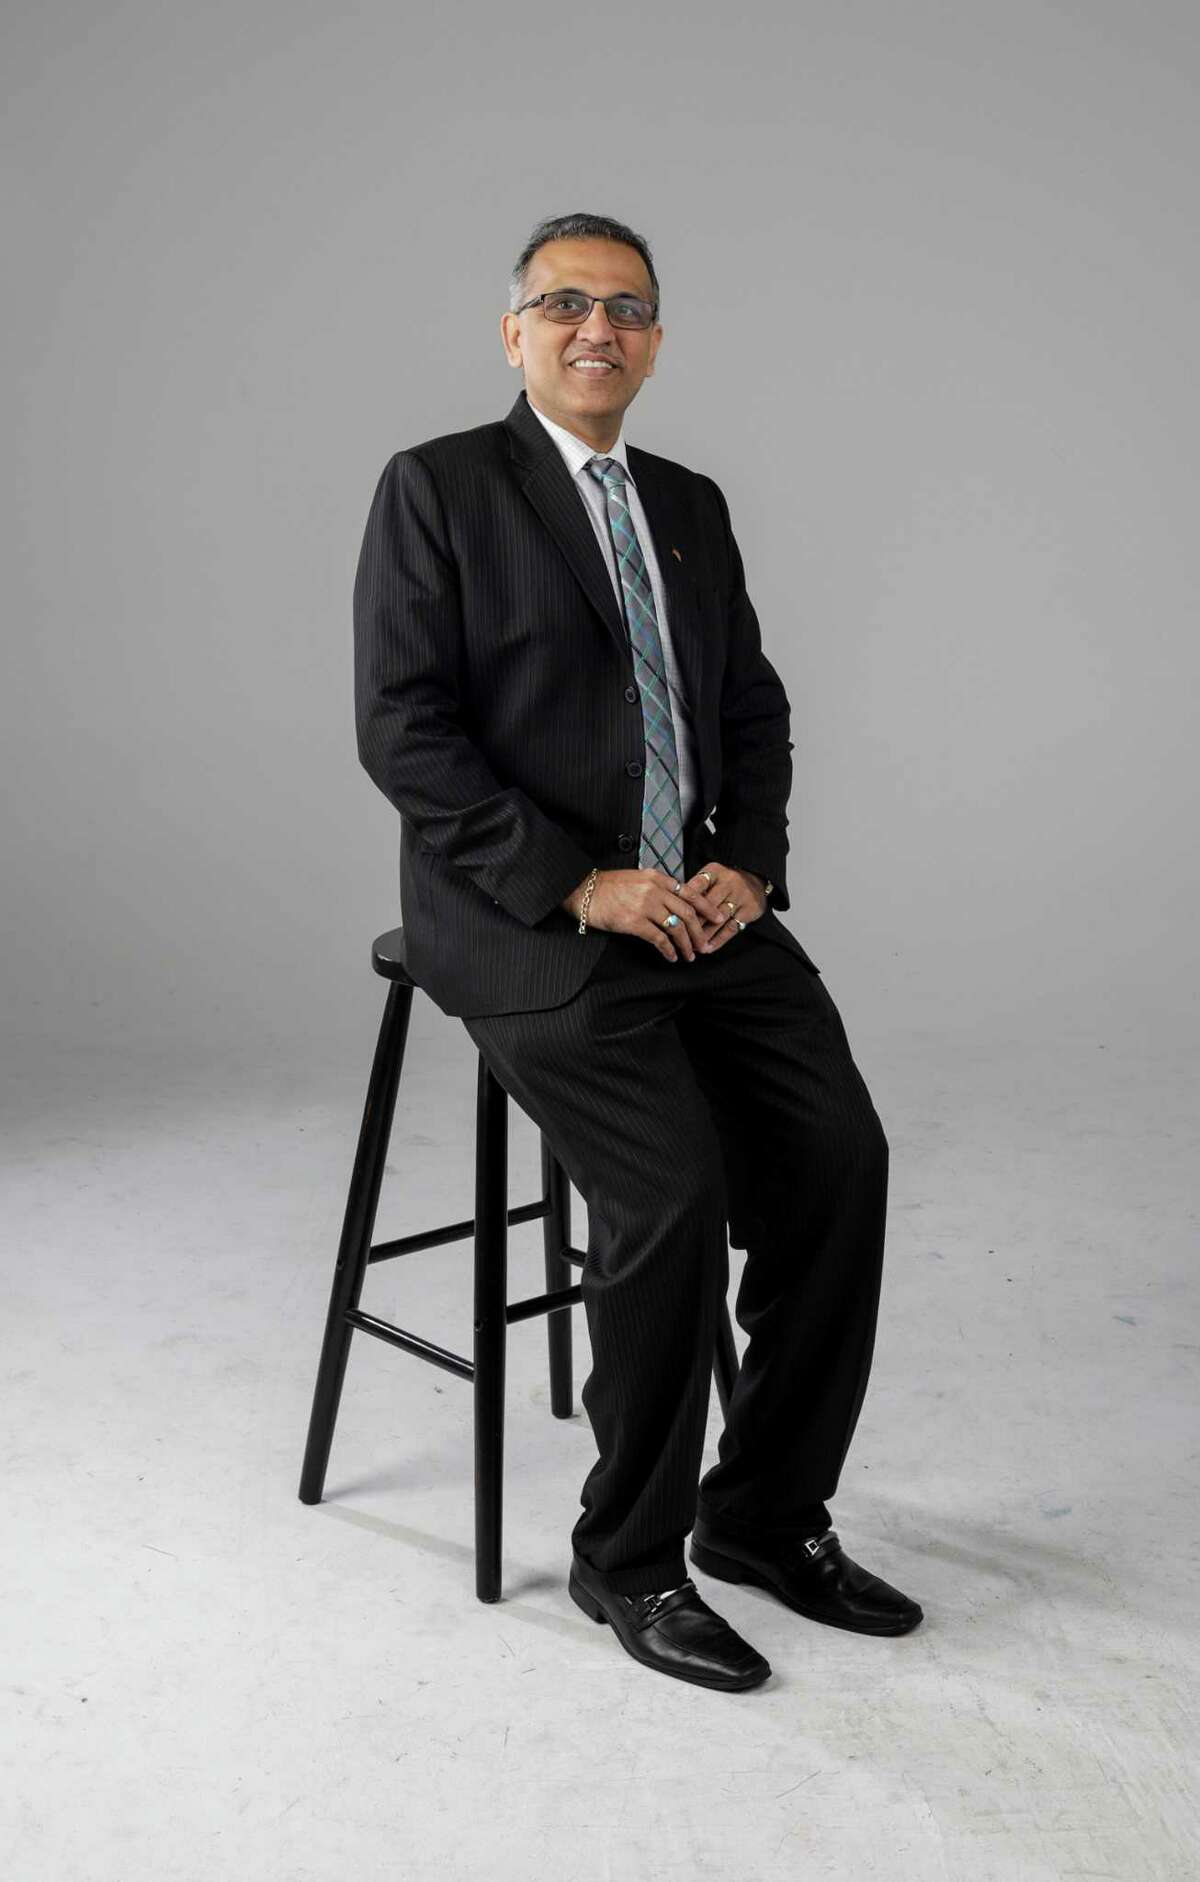 Swapan Dhairyawan, President and Chairman of the IndoAmerican Chamber of Commerce of Greater Houston, poses for a portrait in the Houston Chronicle studio, Tuesday, Feb. 27, 2018, in Houston. ( Jon Shapley / Houston Chronicle )